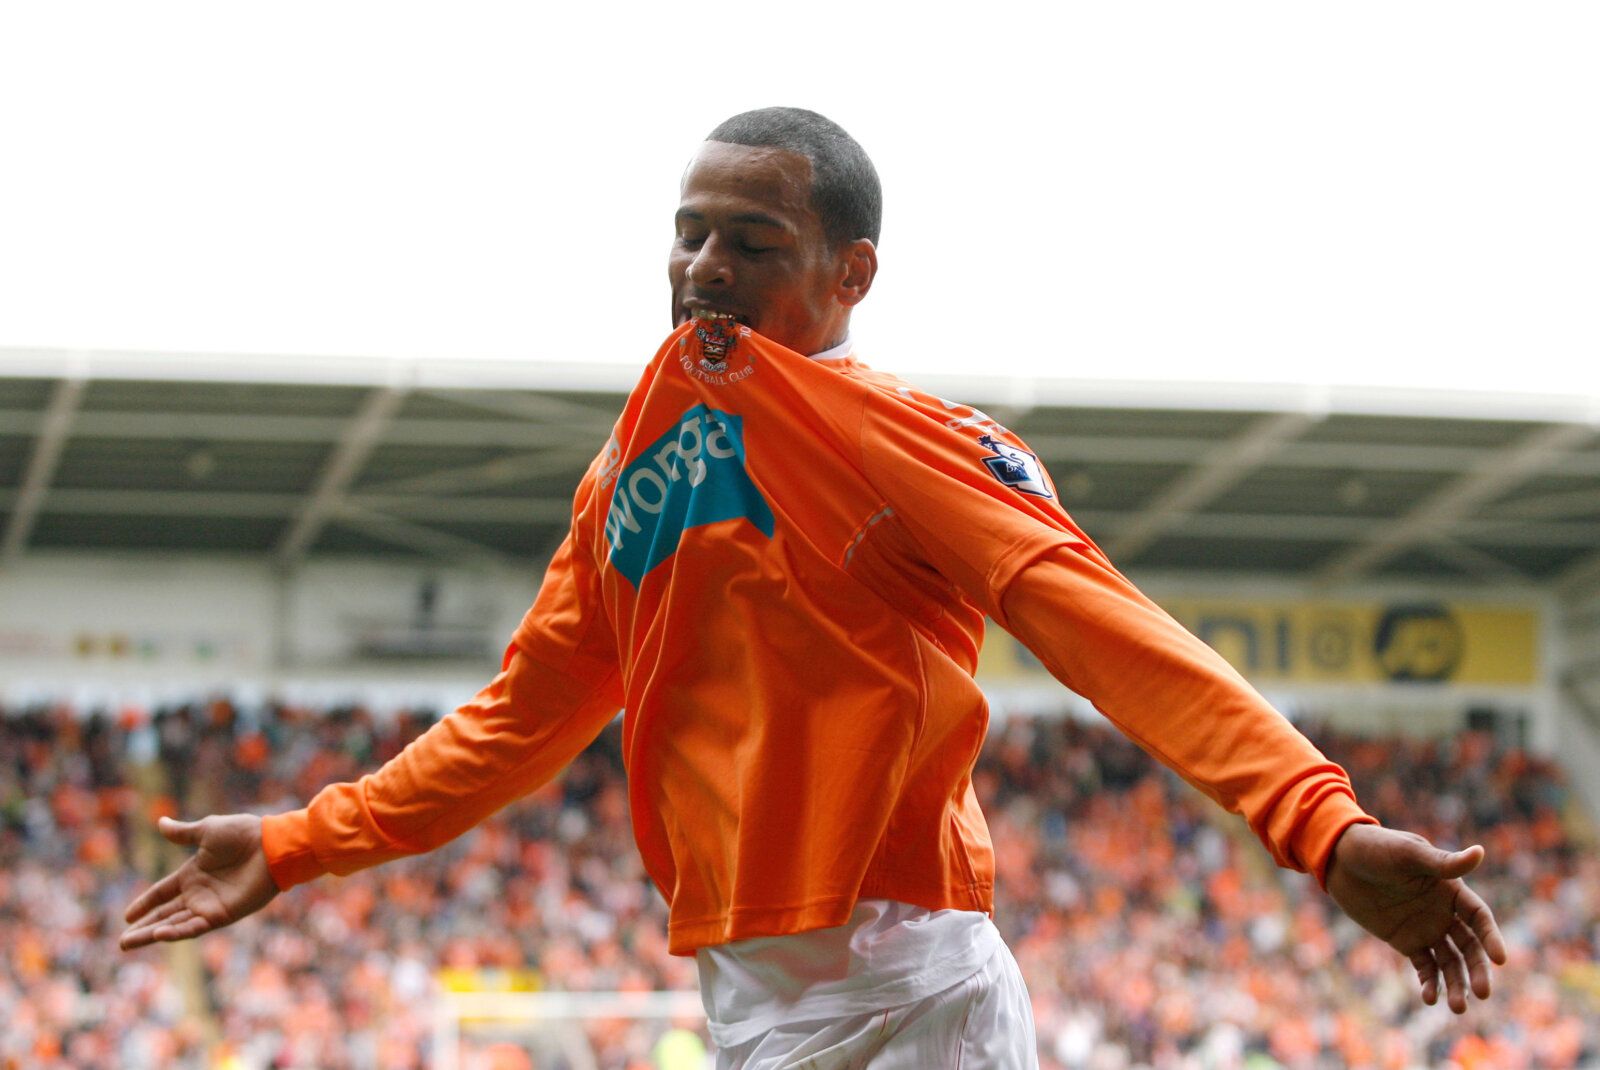 Football - Blackpool v Bolton Wanderers Barclays Premier League  - Bloomfield Road  - 10/11 - 14/5/11 
DJ Campbell celebrates after scoring Blackpool's third goal 
Mandatory Credit: Action Images / Paul Thomas 
Livepic 
NO ONLINE/INTERNET USE WITHOUT A LICENCE FROM THE FOOTBALL DATA CO LTD. FOR LICENCE ENQUIRIES PLEASE TELEPHONE +44 (0) 207 864 9000.